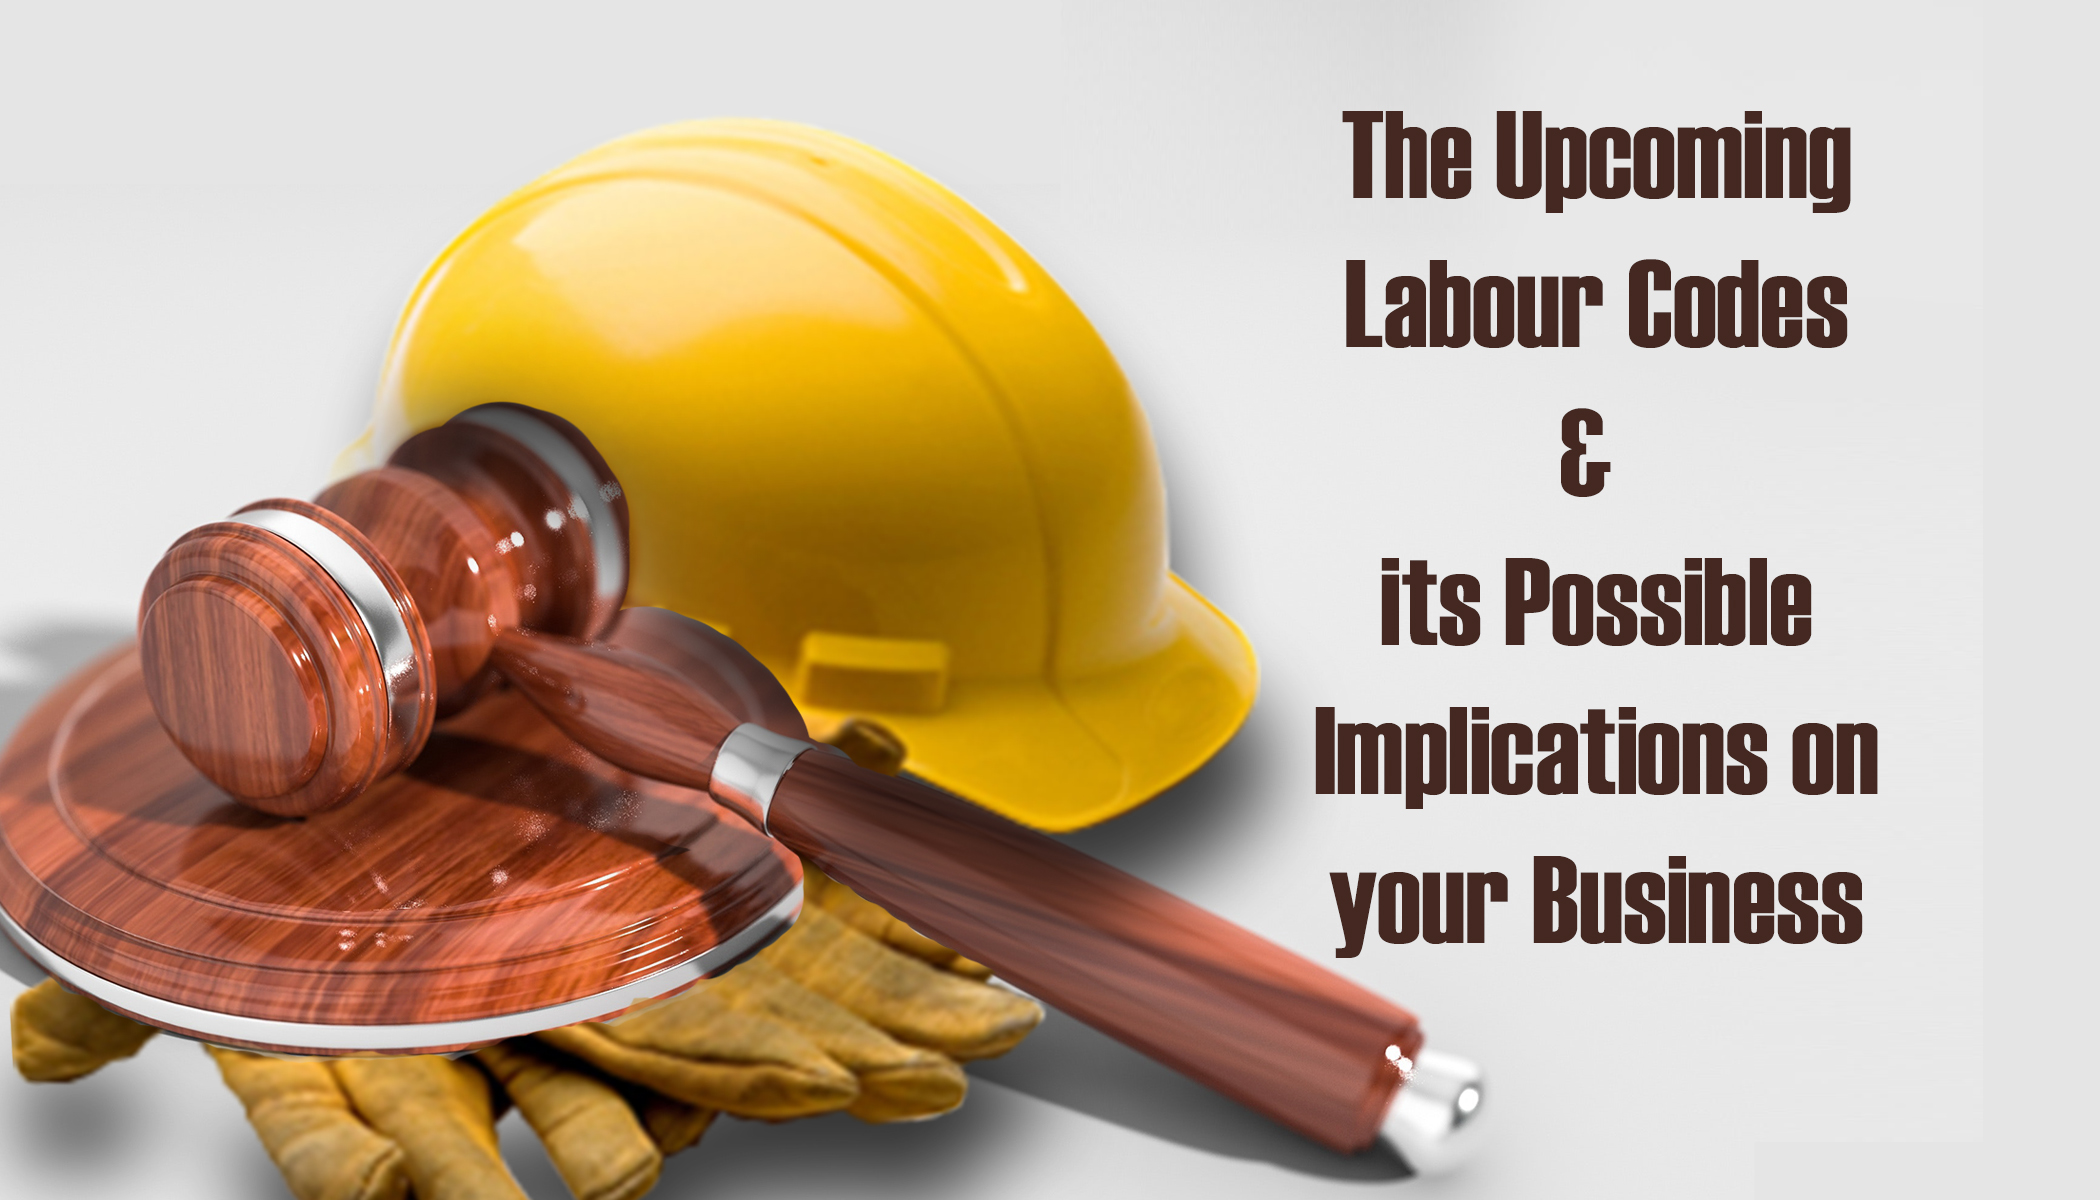 The Labour Codes and its possible implications on your